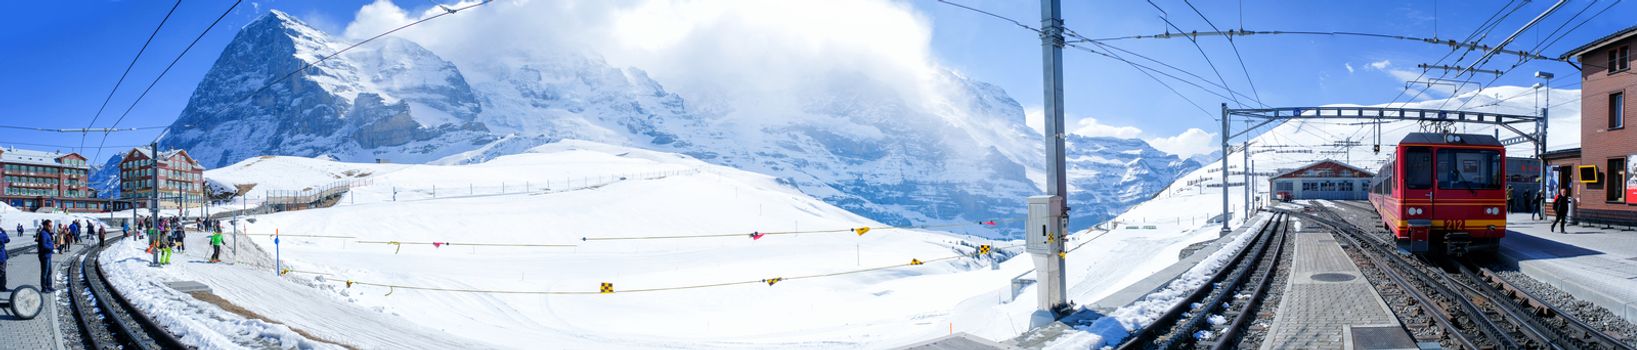 KLEINE SCHEIDEGG, SWITZERLAND - MARCH 28: Panoramic view Tourist train is coming down from the Jungfrau in Kleine Scheidegg, Switzerland on March 28 2017. It's a mountain pass at an elevation of 2,061m.